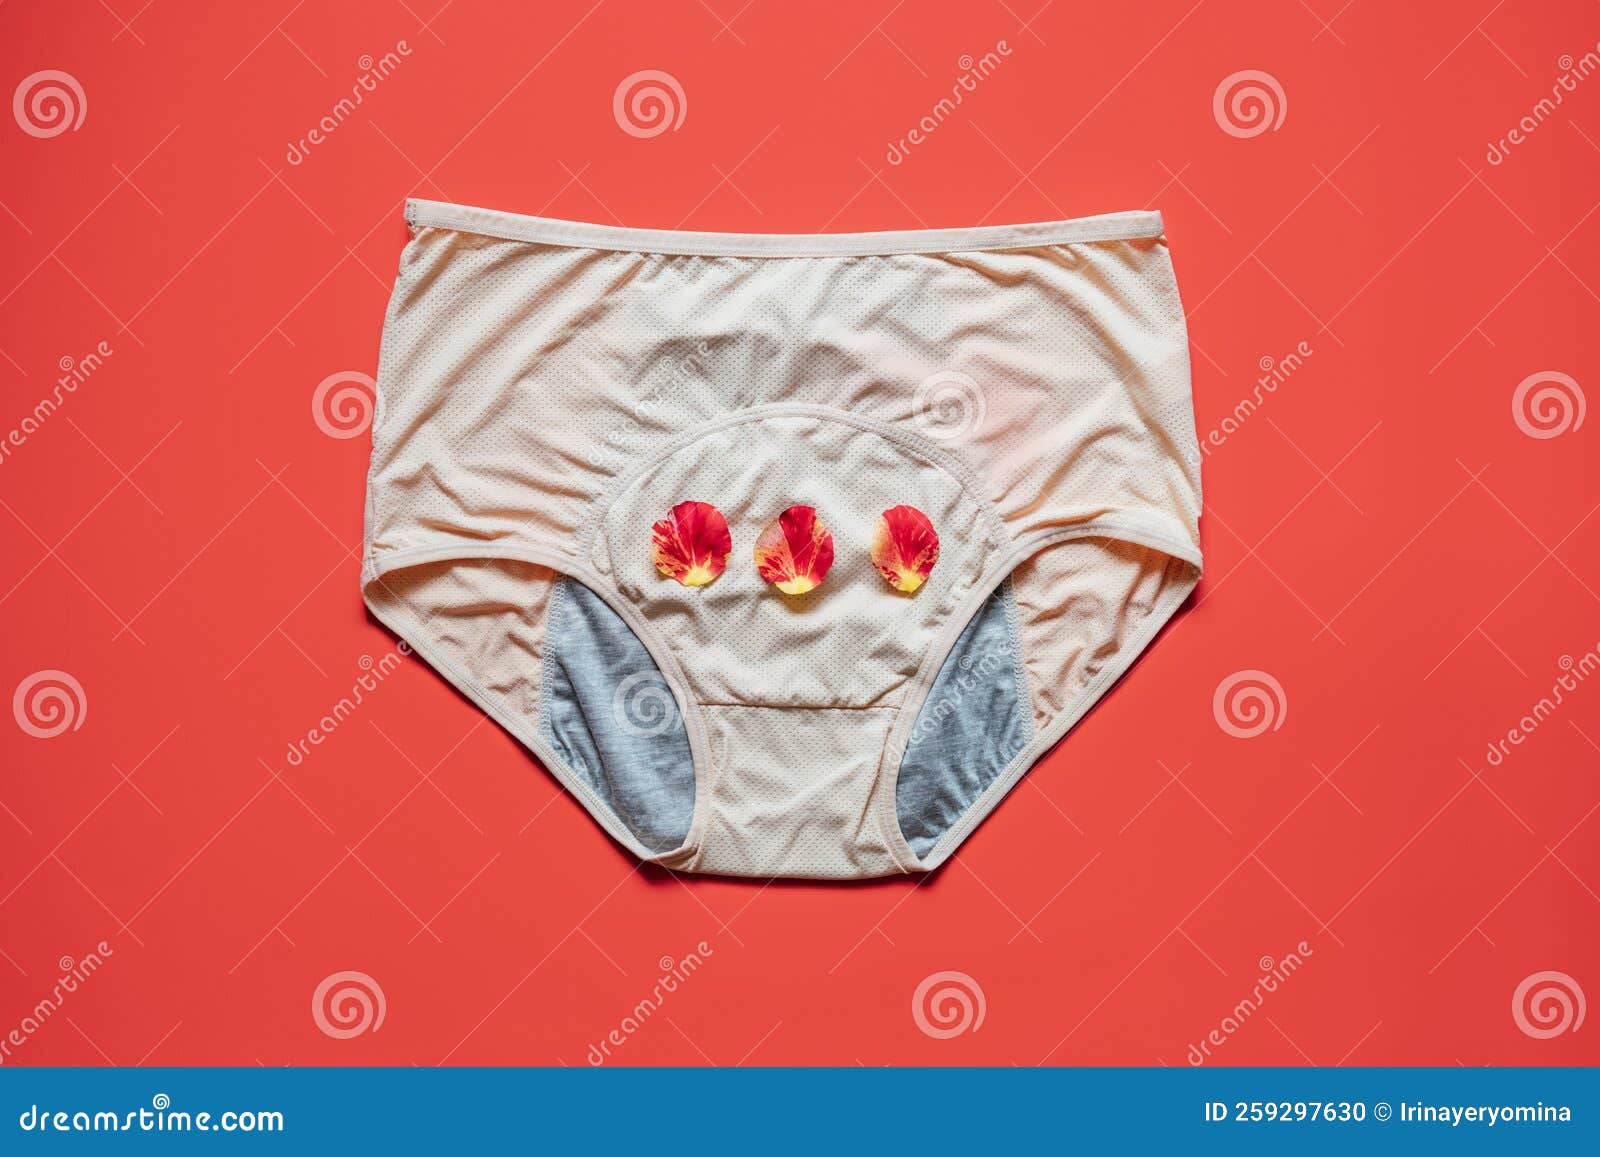 https://thumbs.dreamstime.com/z/reusable-period-underwear-red-background-absorbent-affordable-period-panties-to-absorb-menstrual-fluid-reusable-period-259297630.jpg